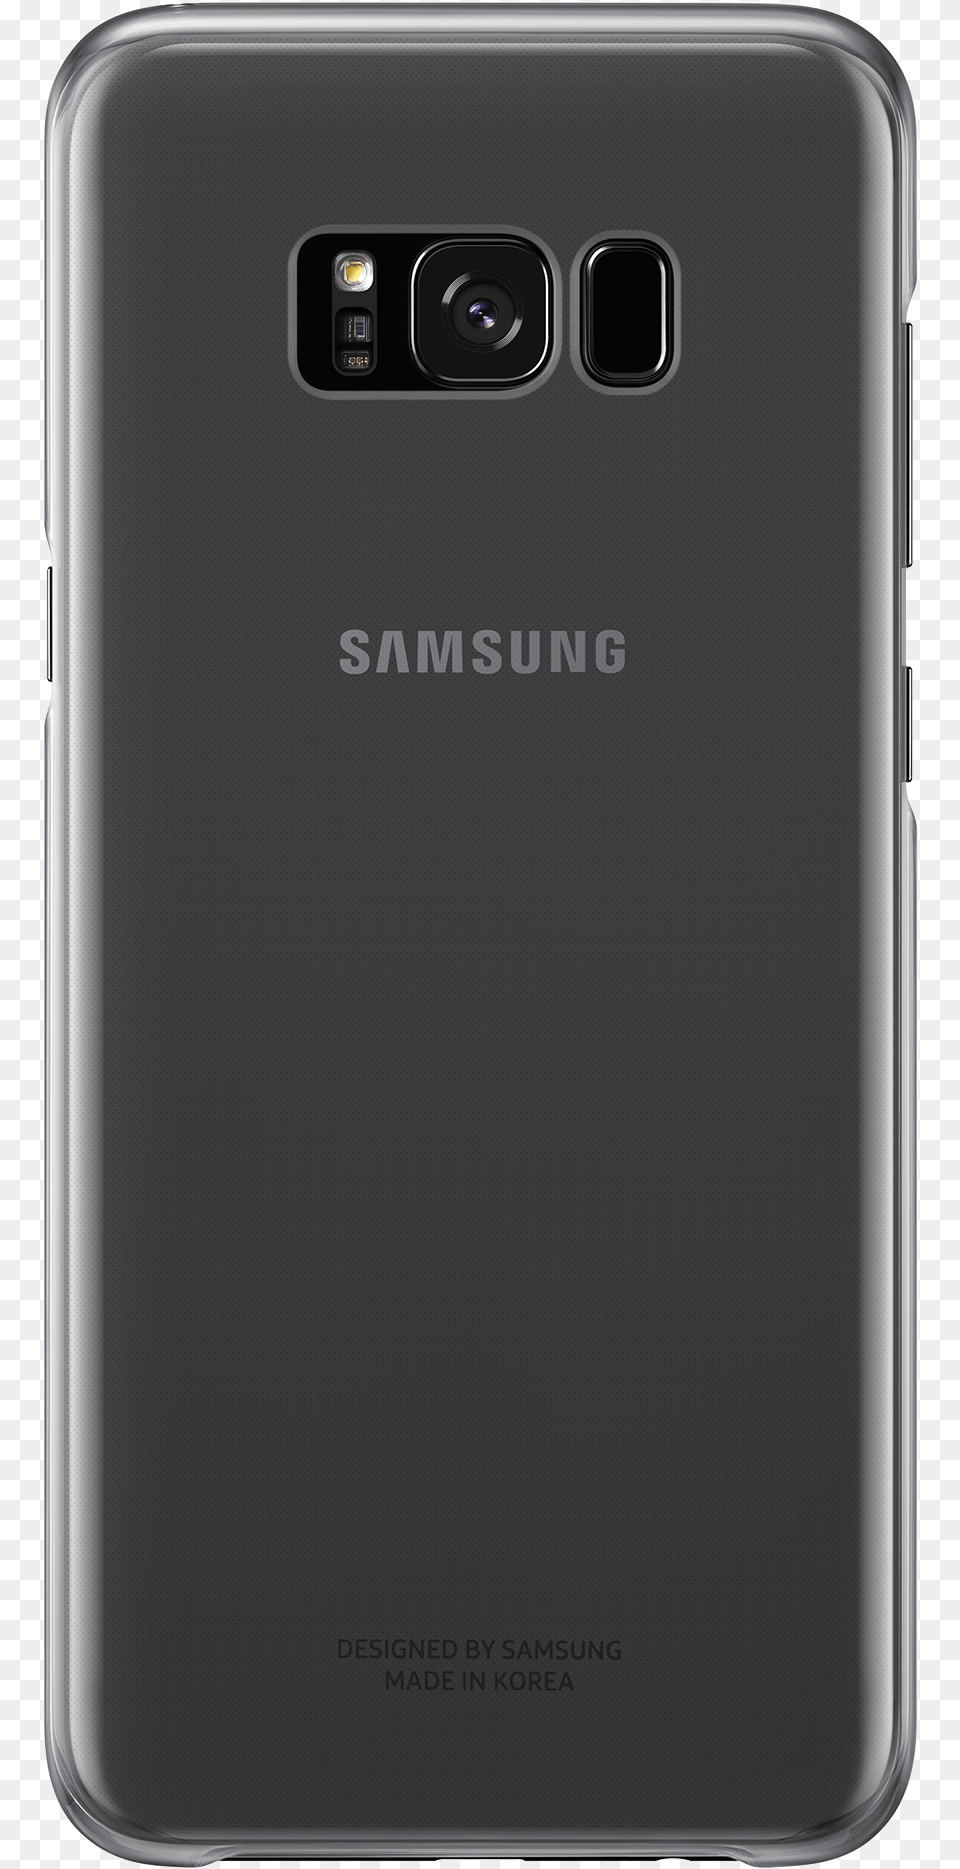 Samsung S8 Active Black, Electronics, Mobile Phone, Phone, Iphone Png Image